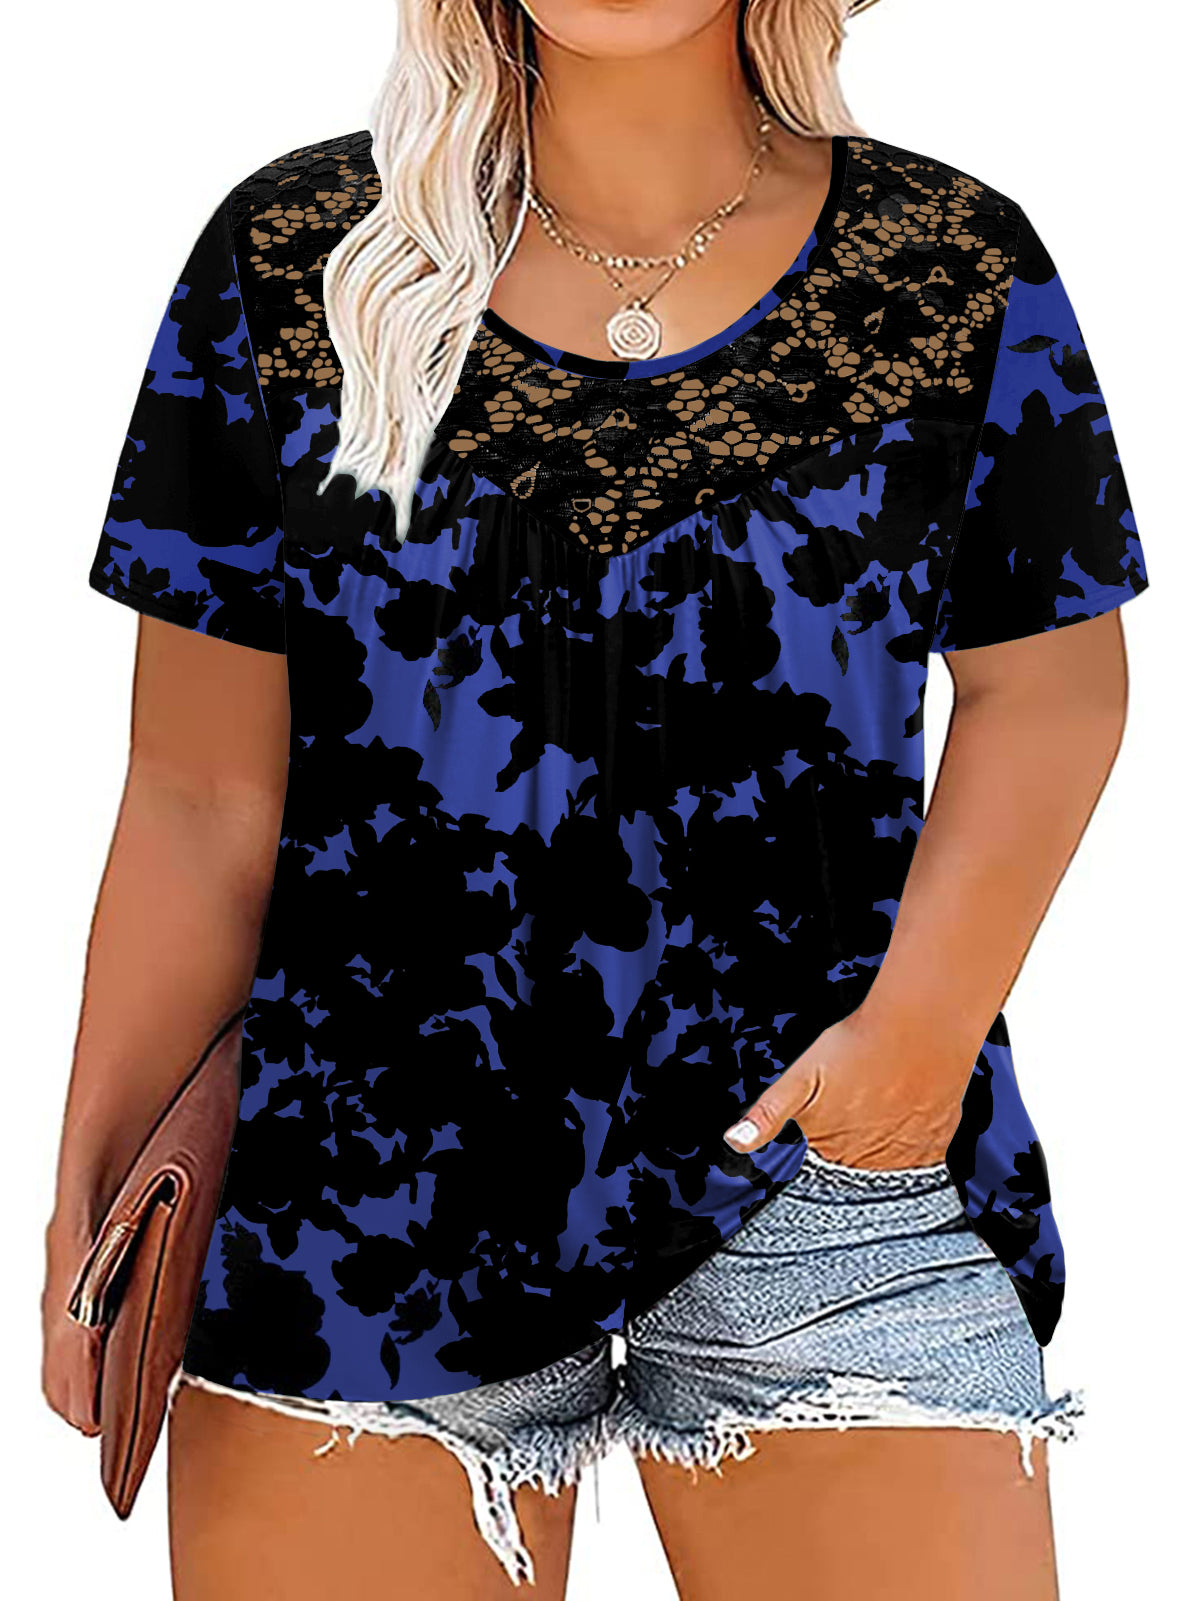 VISLILY Women's-Plus-Size-Tops Summer Lace Tee Shirts Short Sleeve Tunics  Flowy Pleated Blouses XL-4XL